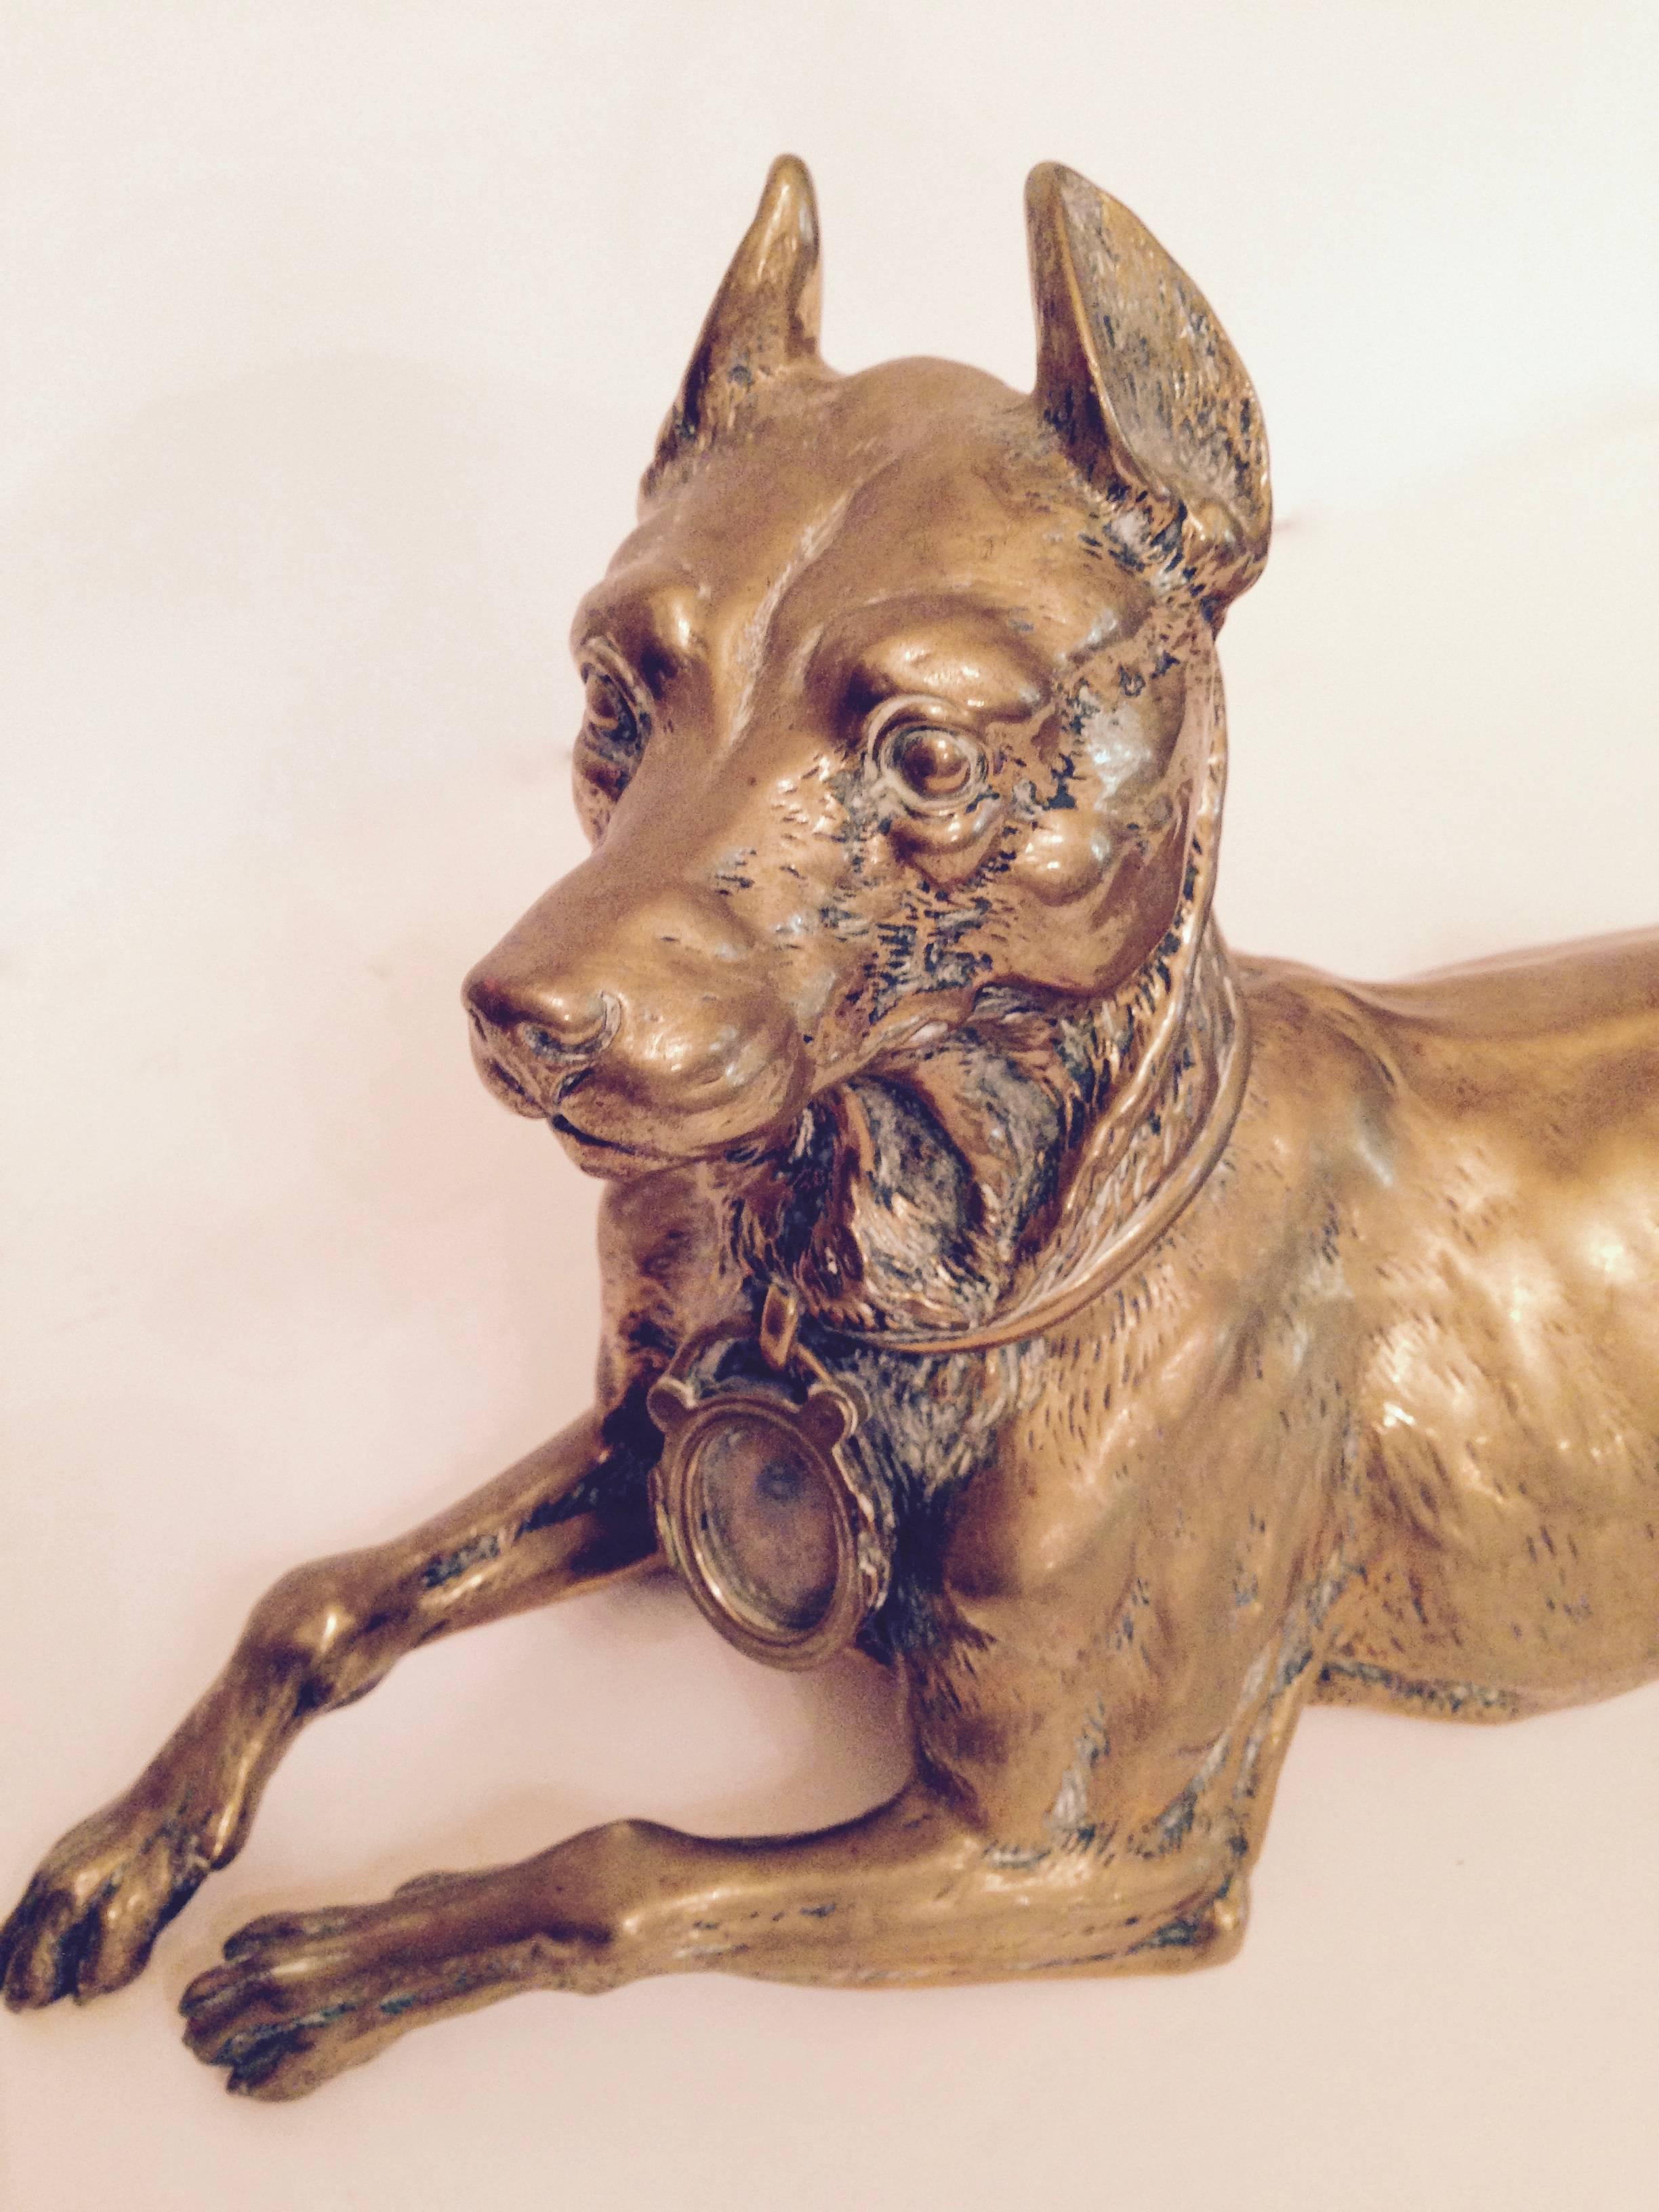 Very heavy 19th century French Bronze figure of a hound with a collar in Bronze around the neck with a glass fronted locket hanging.